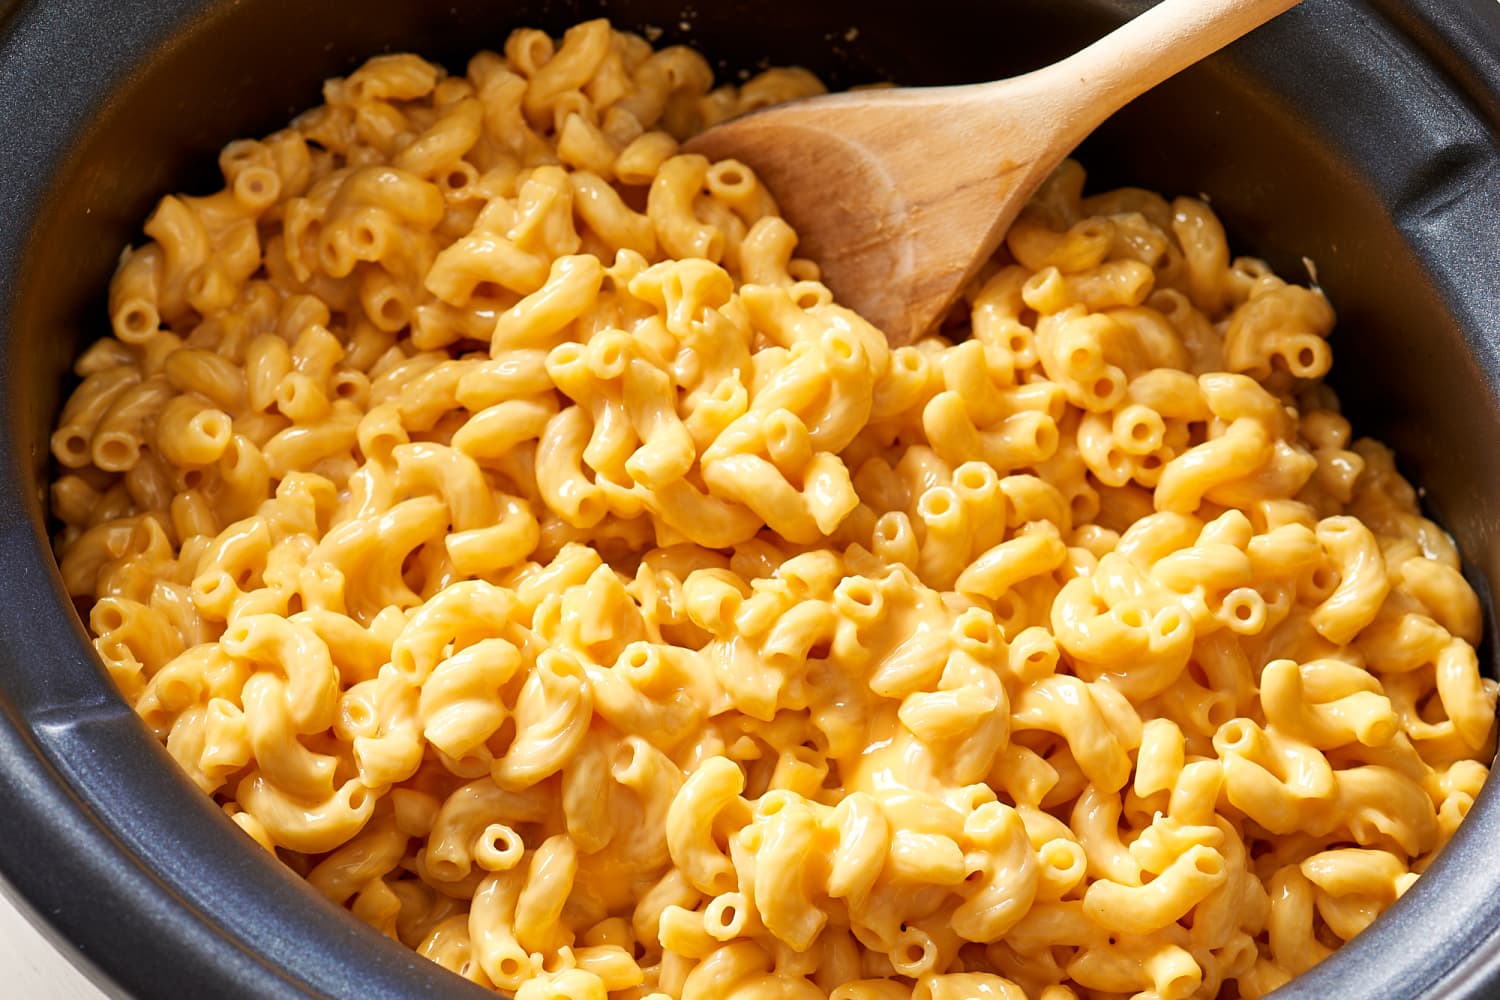 How To Make Mac and Cheese in the Slow Cooker